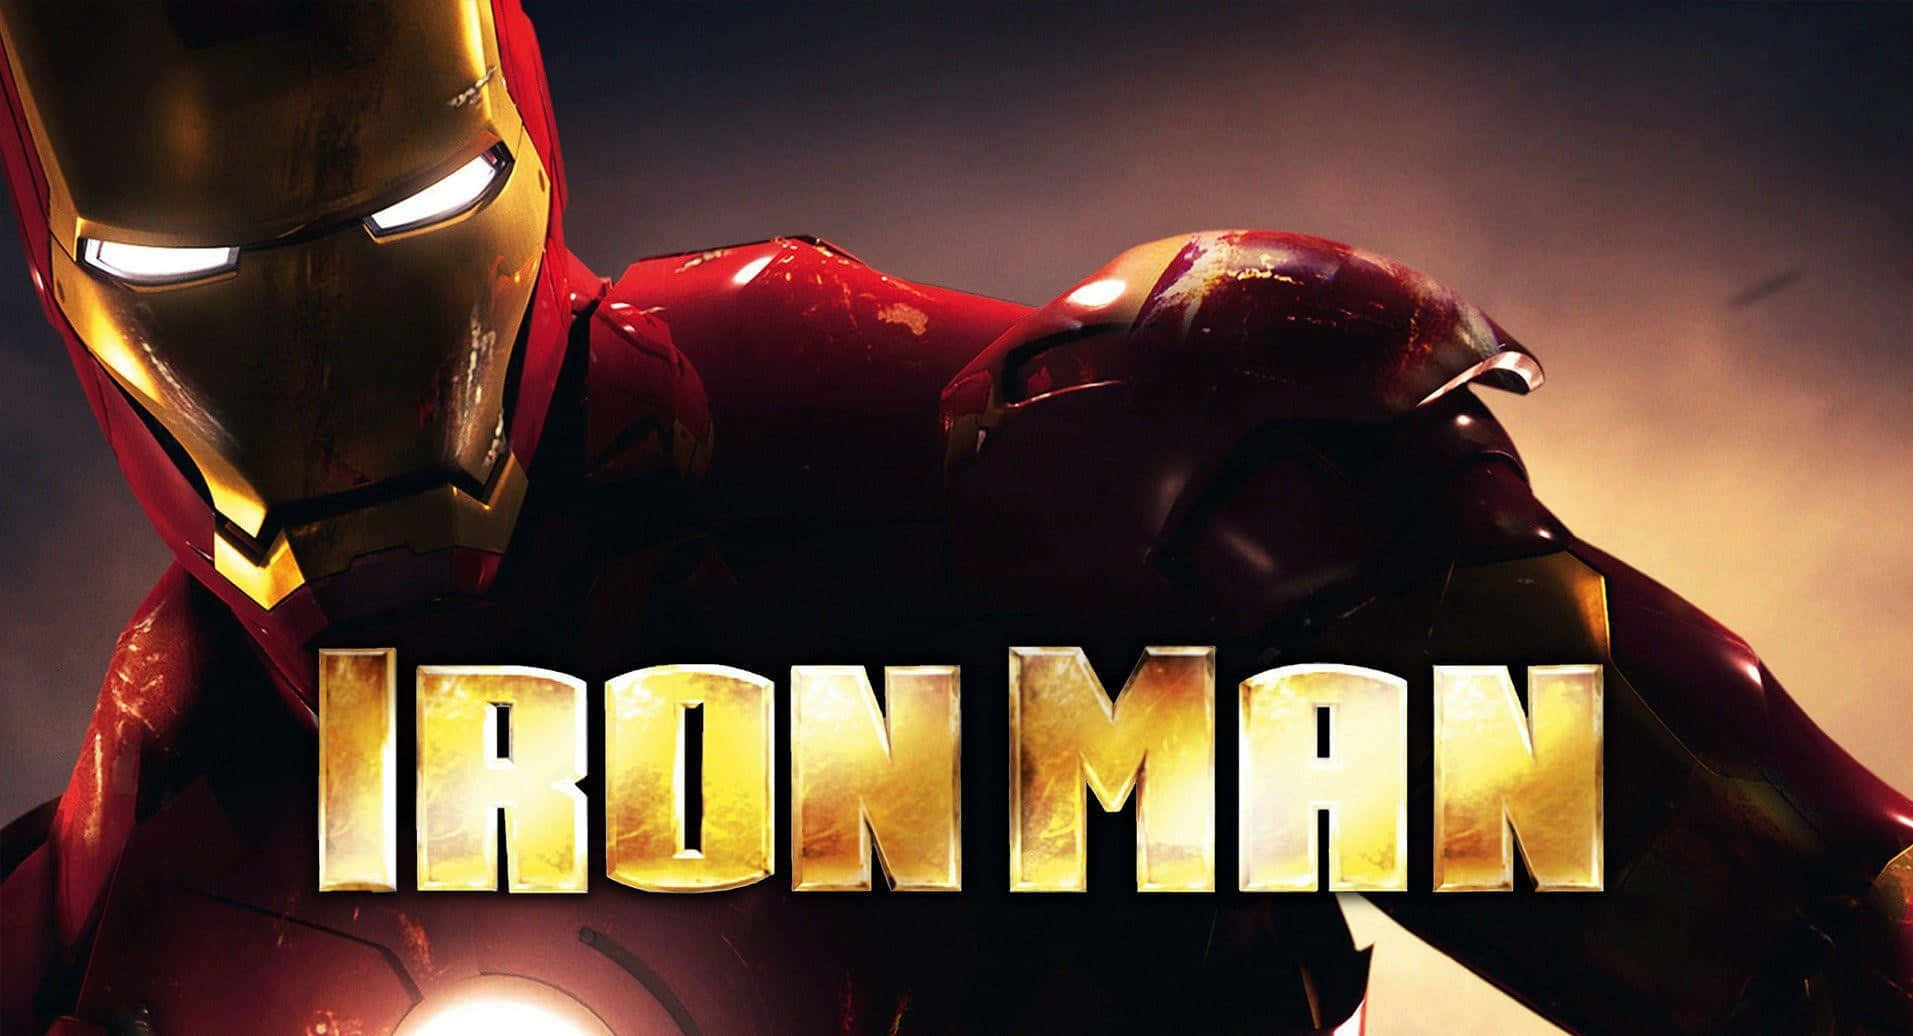 Iron Man has become an iconic superhero with his powerful suits&witty attitude. Wallpaper